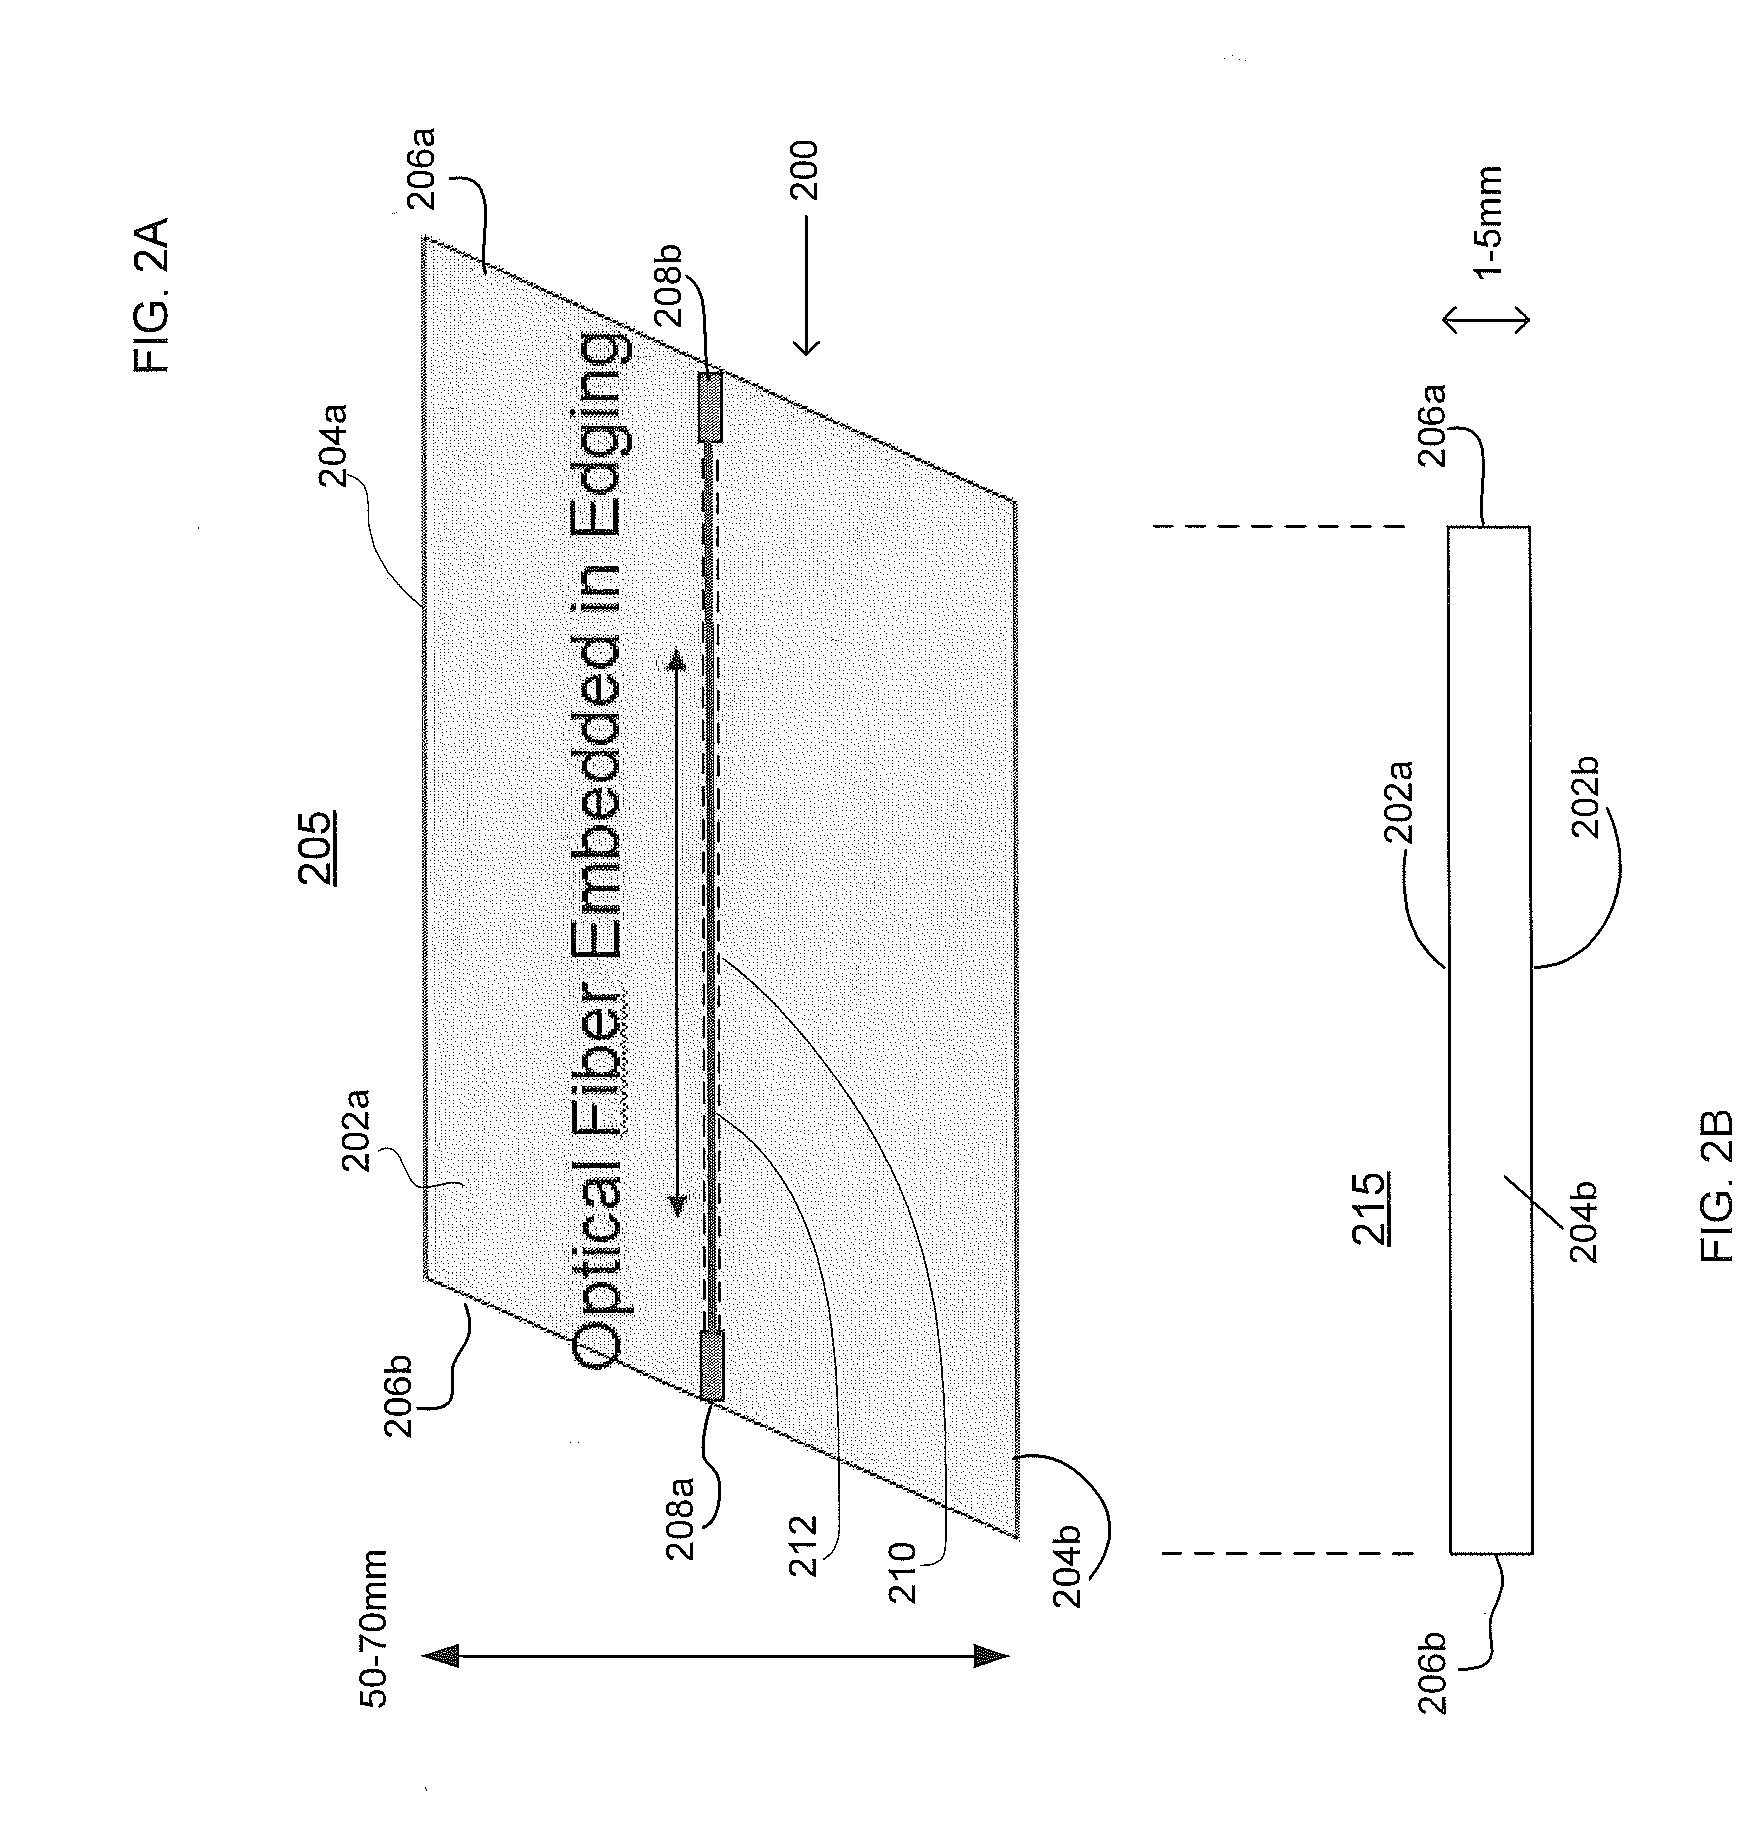 Cable edging systems and methods